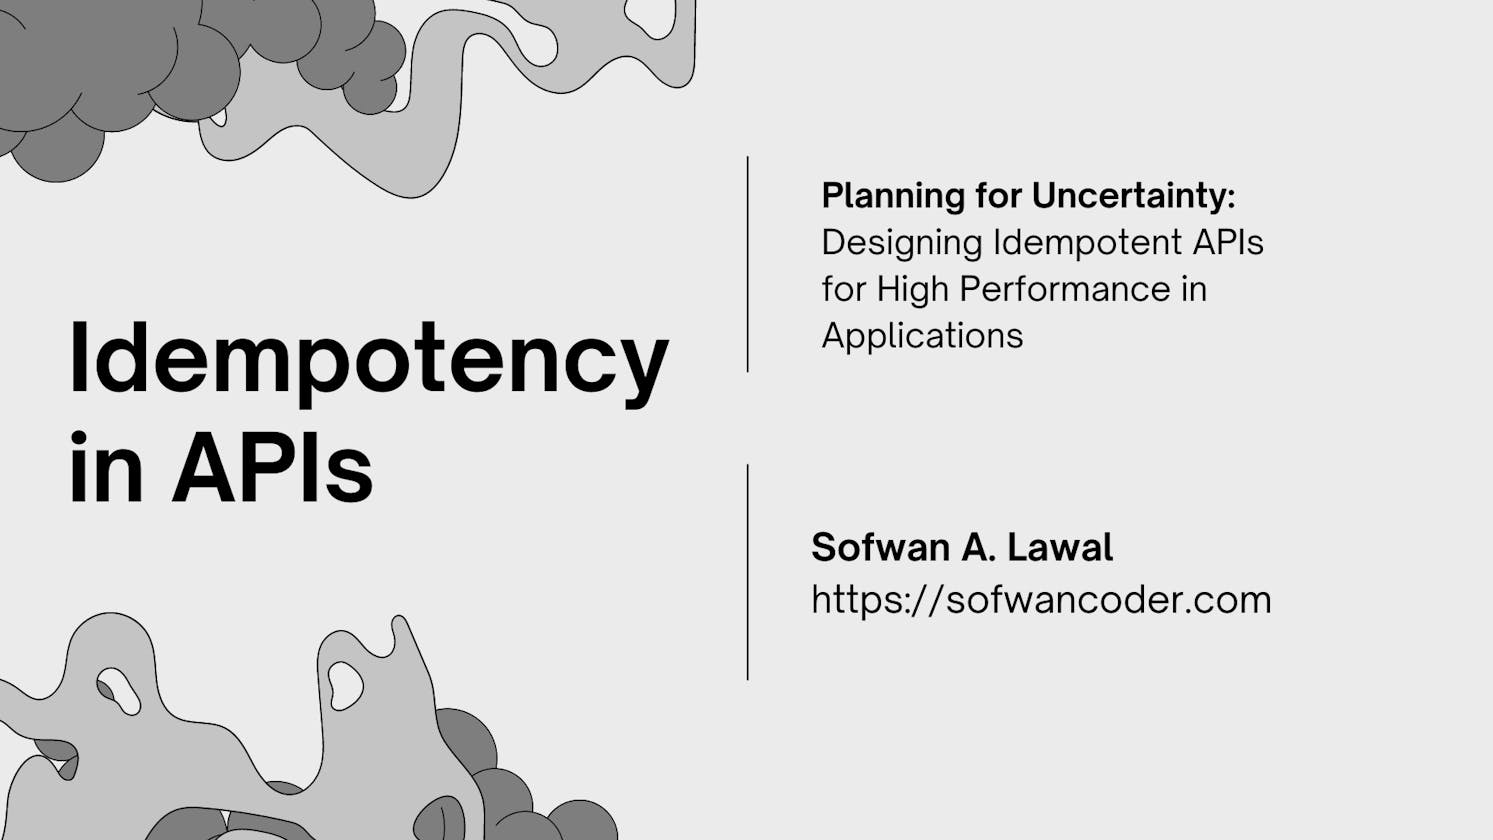 Idempotency In APIs: Planning for Uncertainty